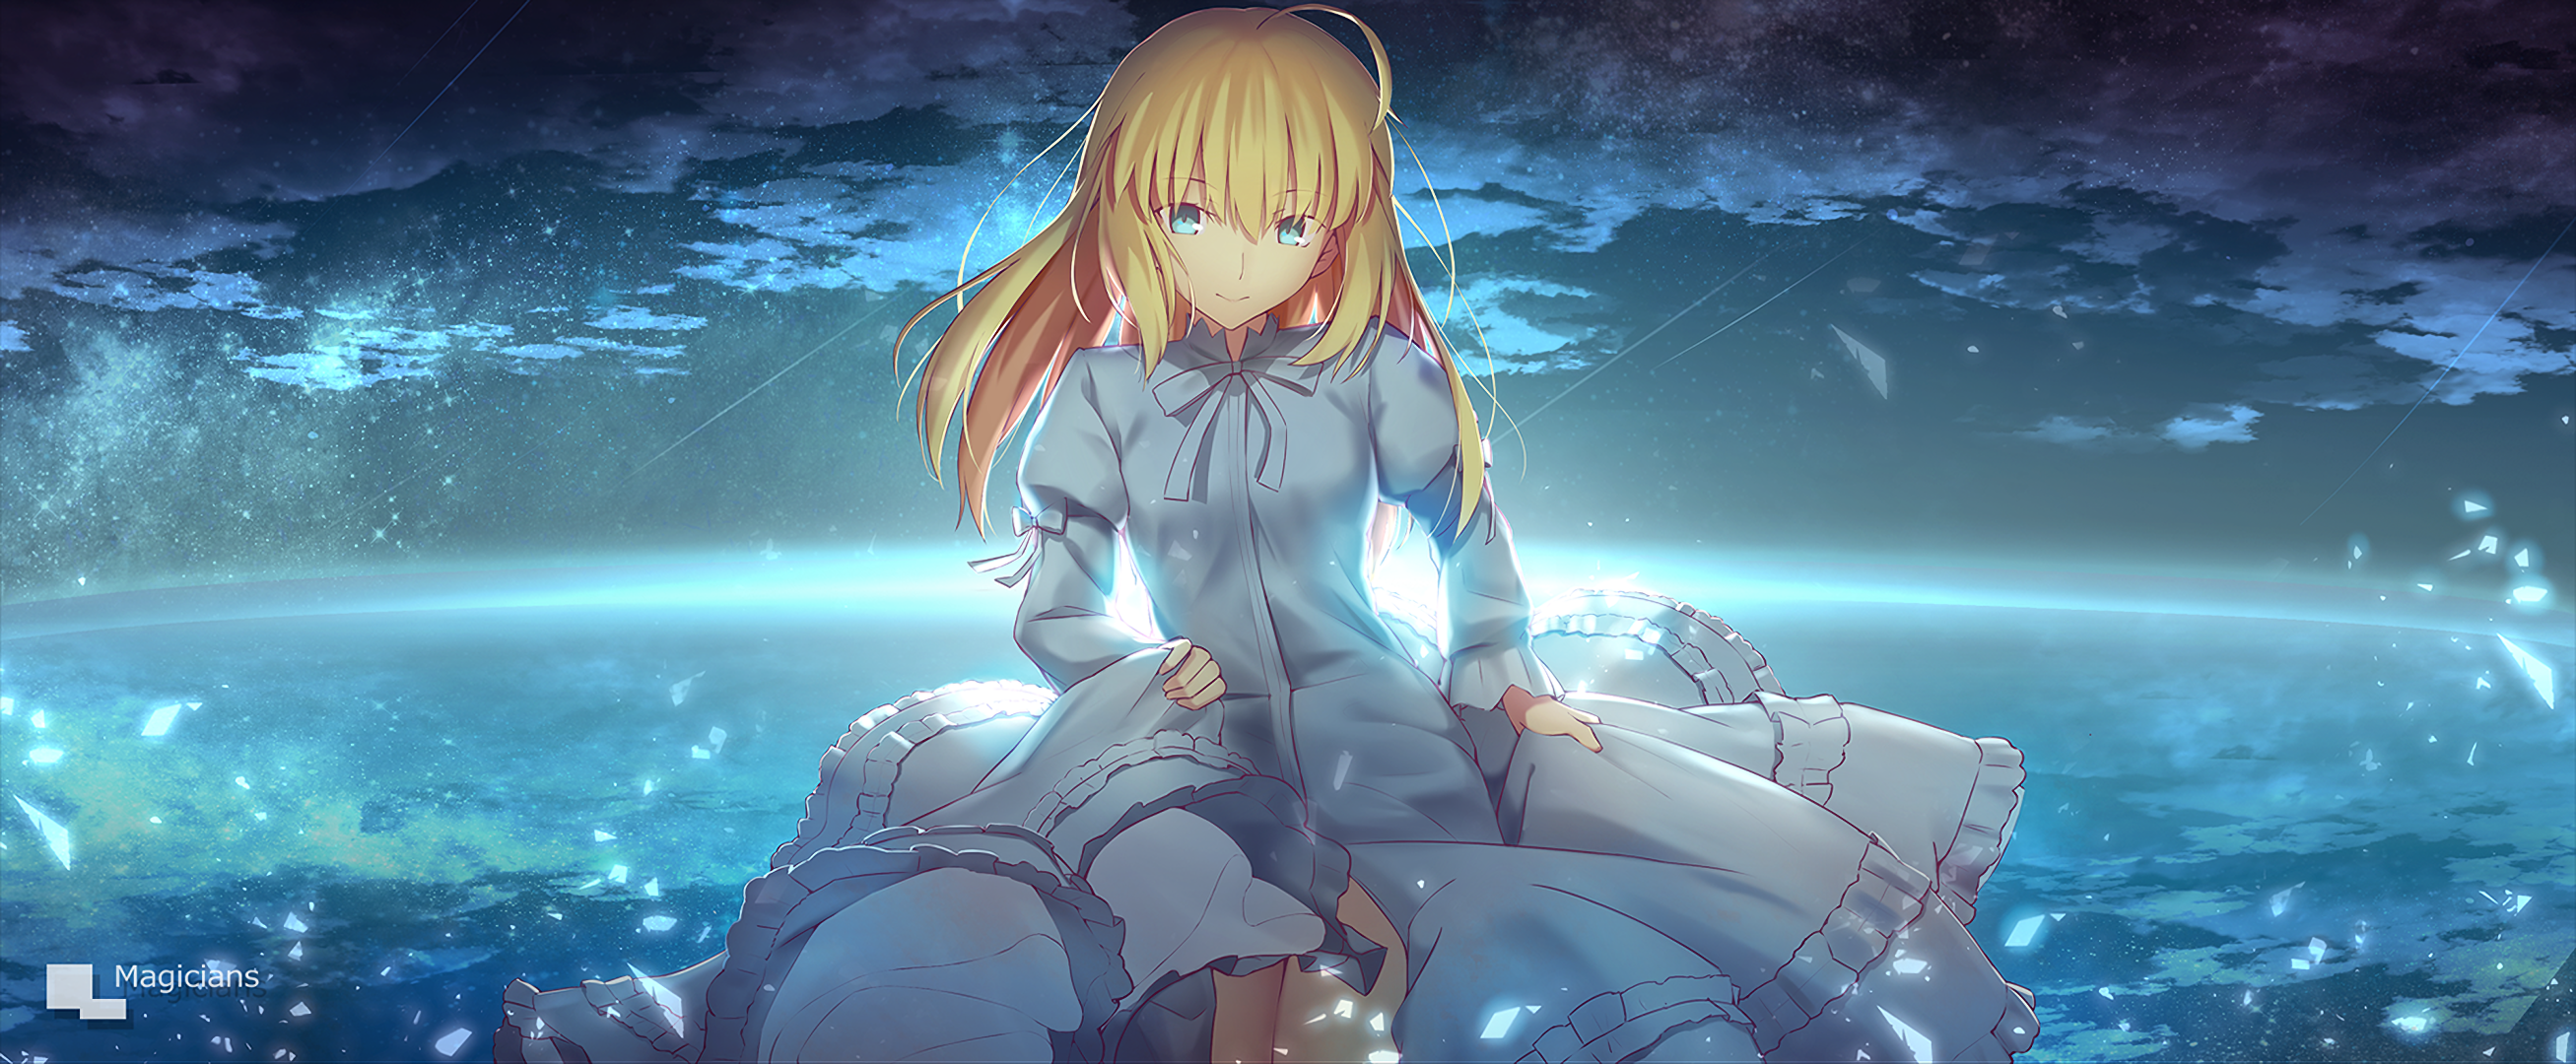 Fate/Stay Night HD Wallpaper by Magicians